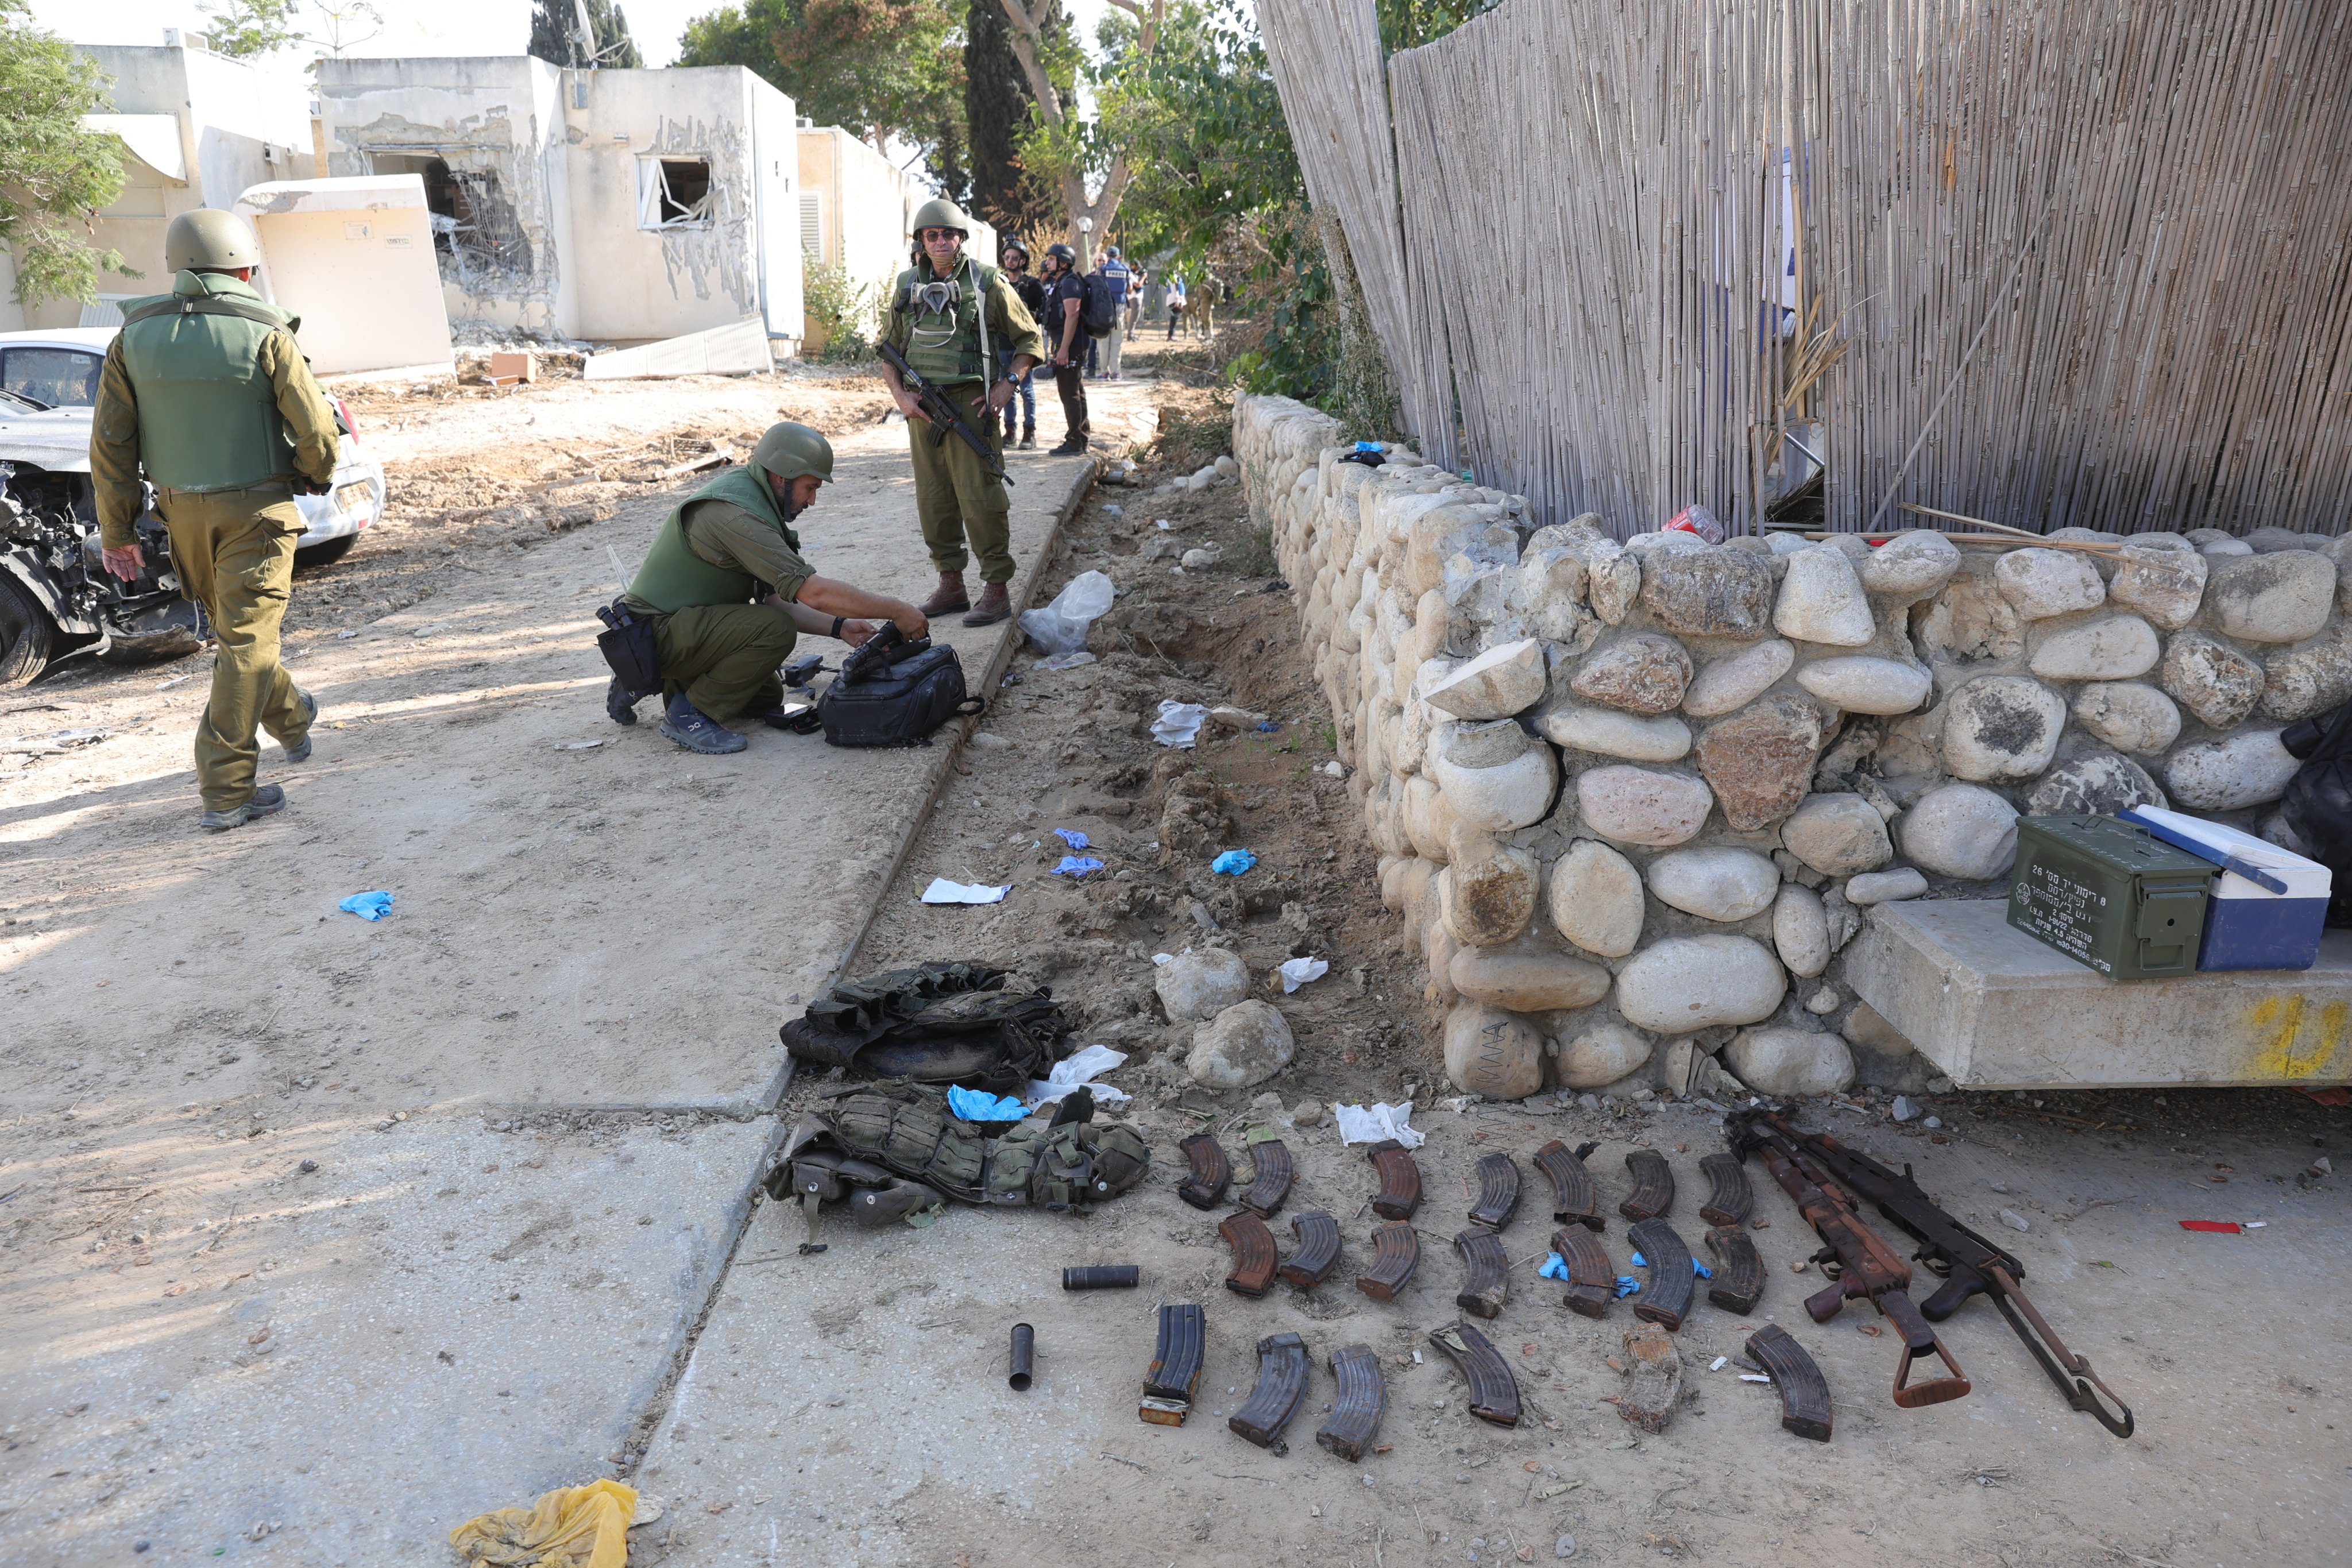 Weapons belonging to Hamas militants lie on the ground at the Kfar Aza Kibbutz, Israel, which was attacked by Hamas on October 7. Photo: EPA-EFE